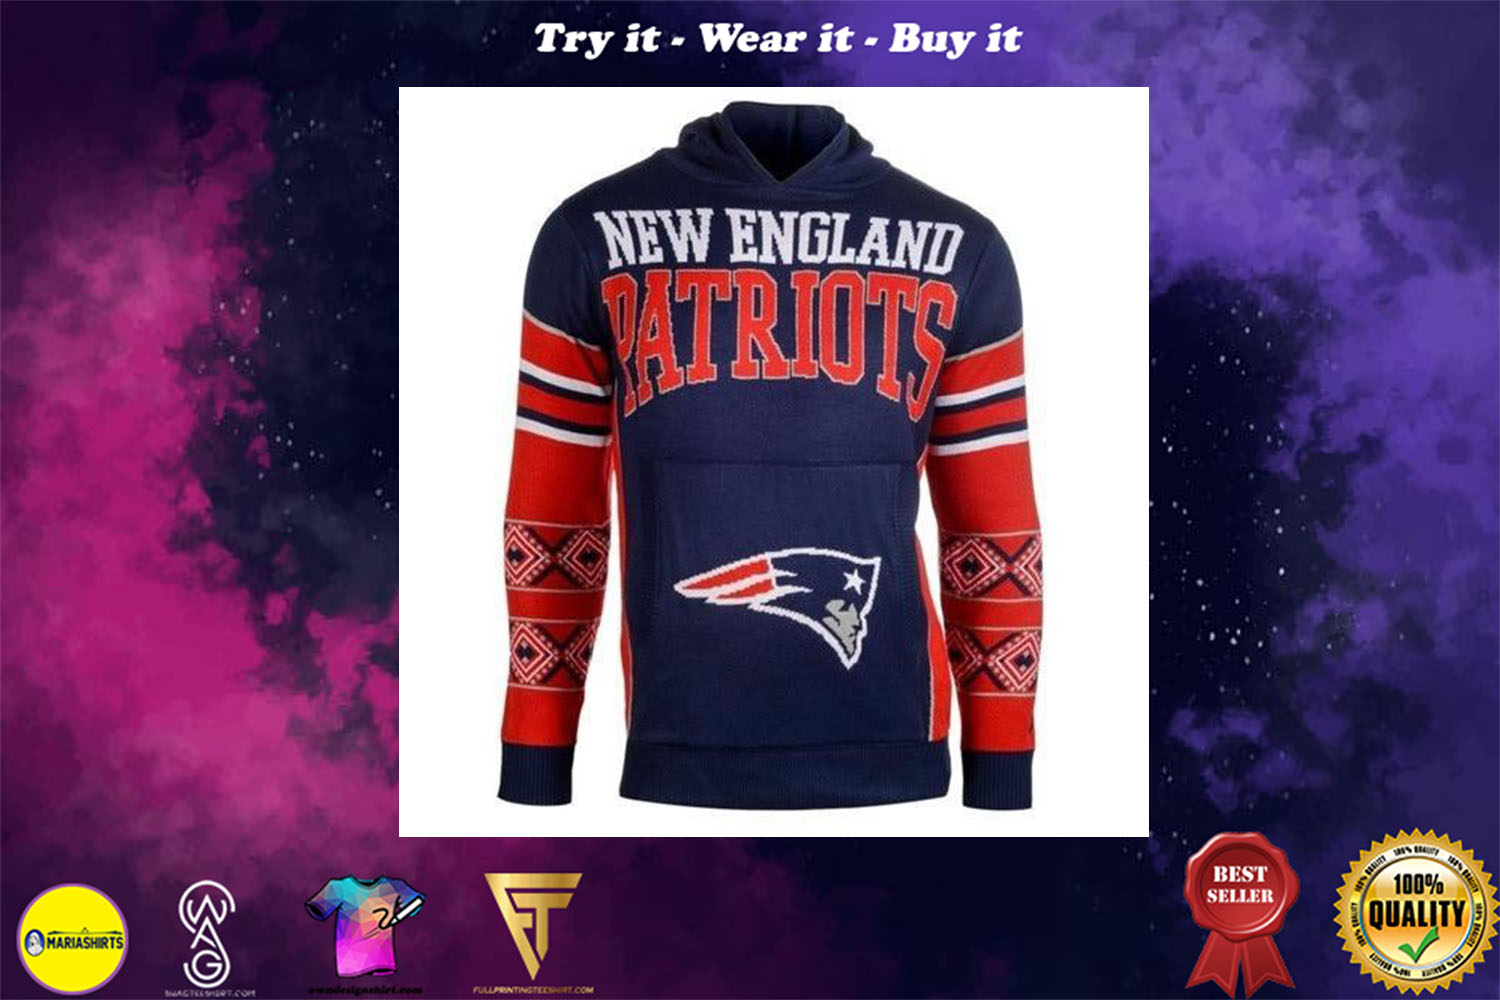 the new england patriots nfl full over print shirt